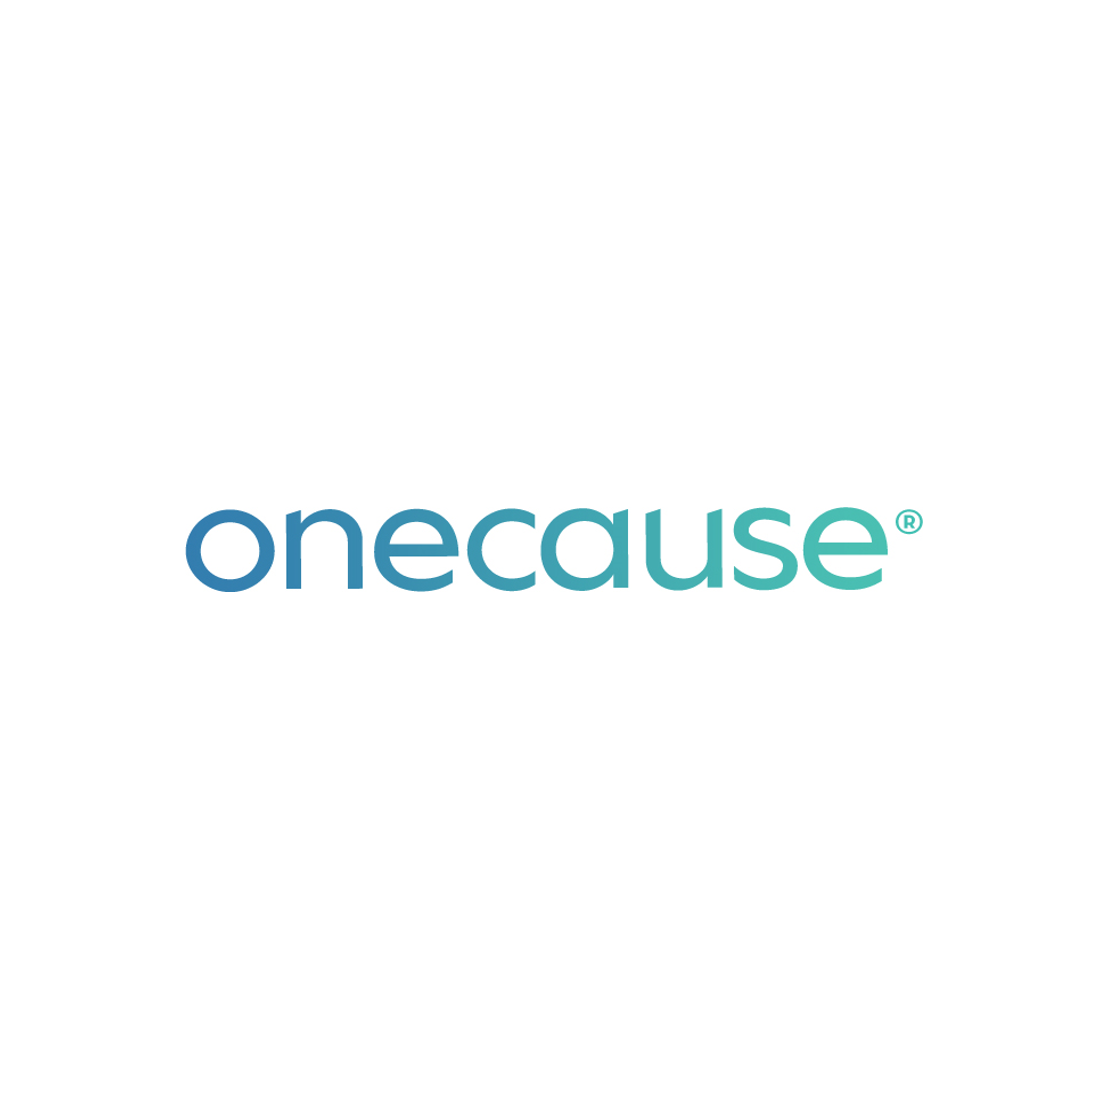 One Cause